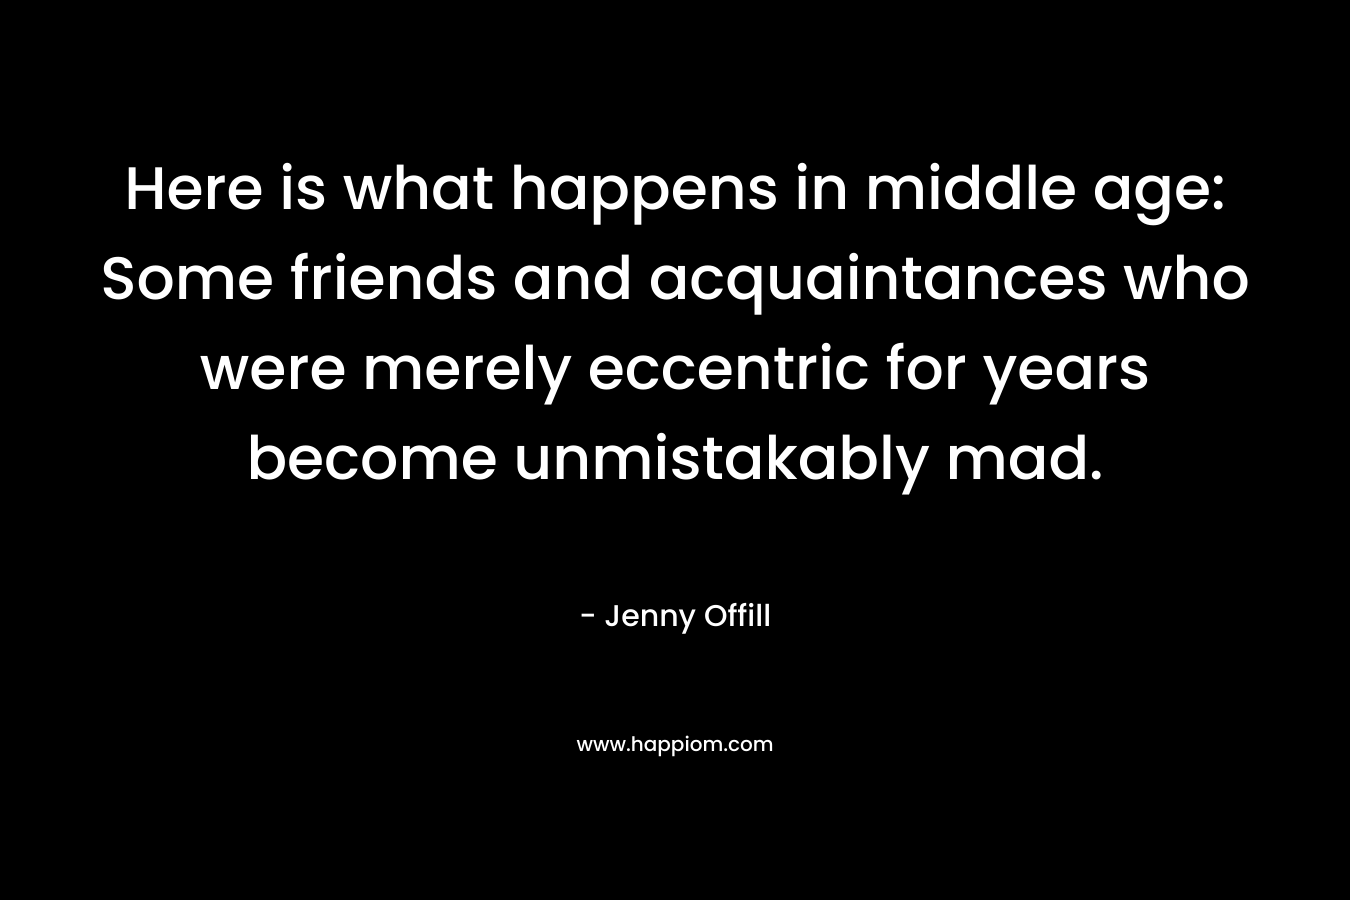 Here is what happens in middle age: Some friends and acquaintances who were merely eccentric for years become unmistakably mad. – Jenny Offill